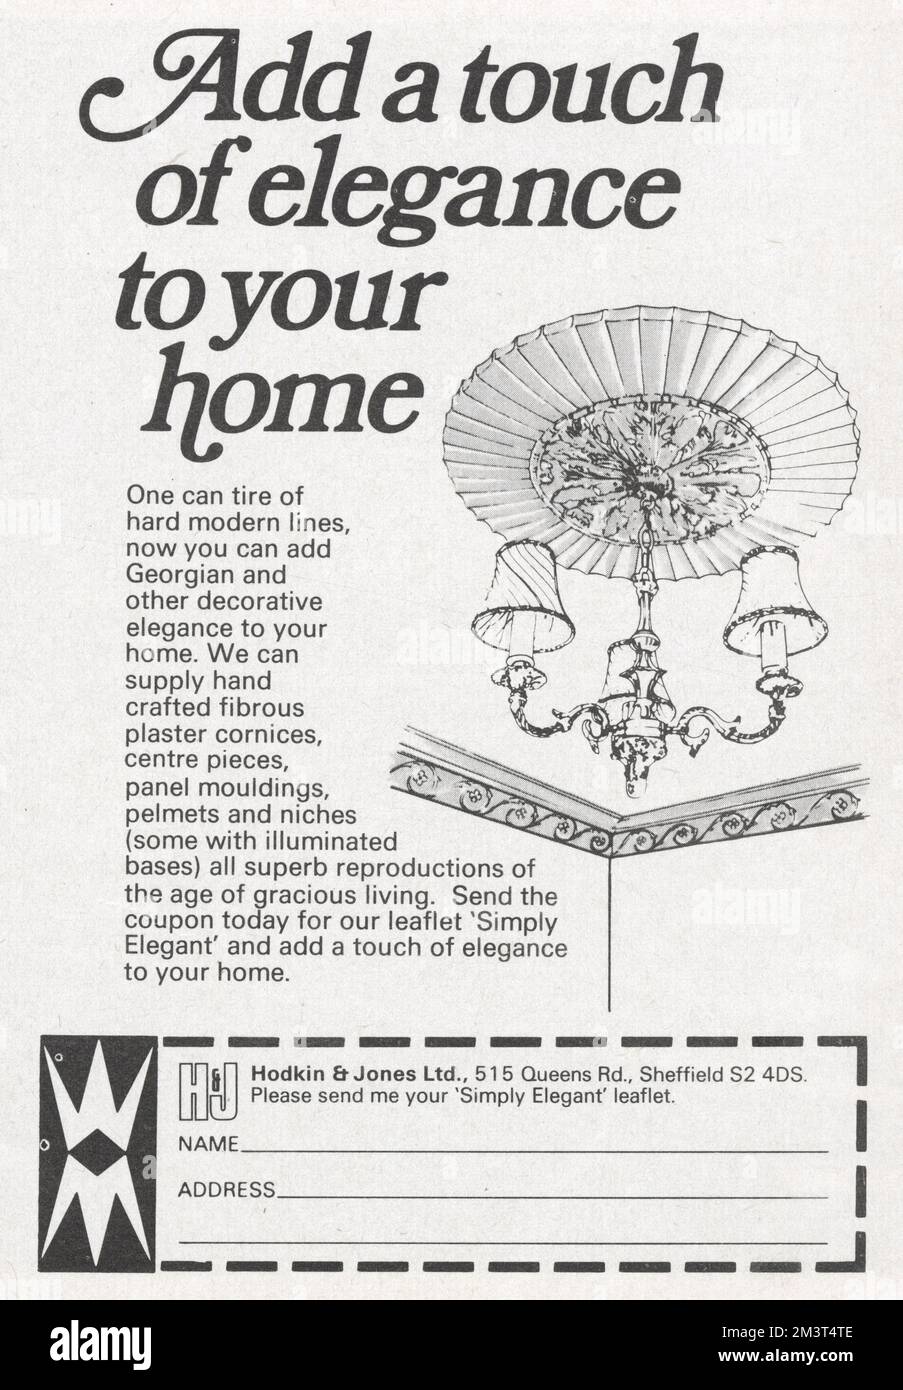 Add a touch of Georgian elegance to your home. Hodkin & Jones Ltd advert for hand-crafted fibrous plaster cornices, centre pieces, panel mouldings, pelmets and niches.     Date: 1974 Stock Photo